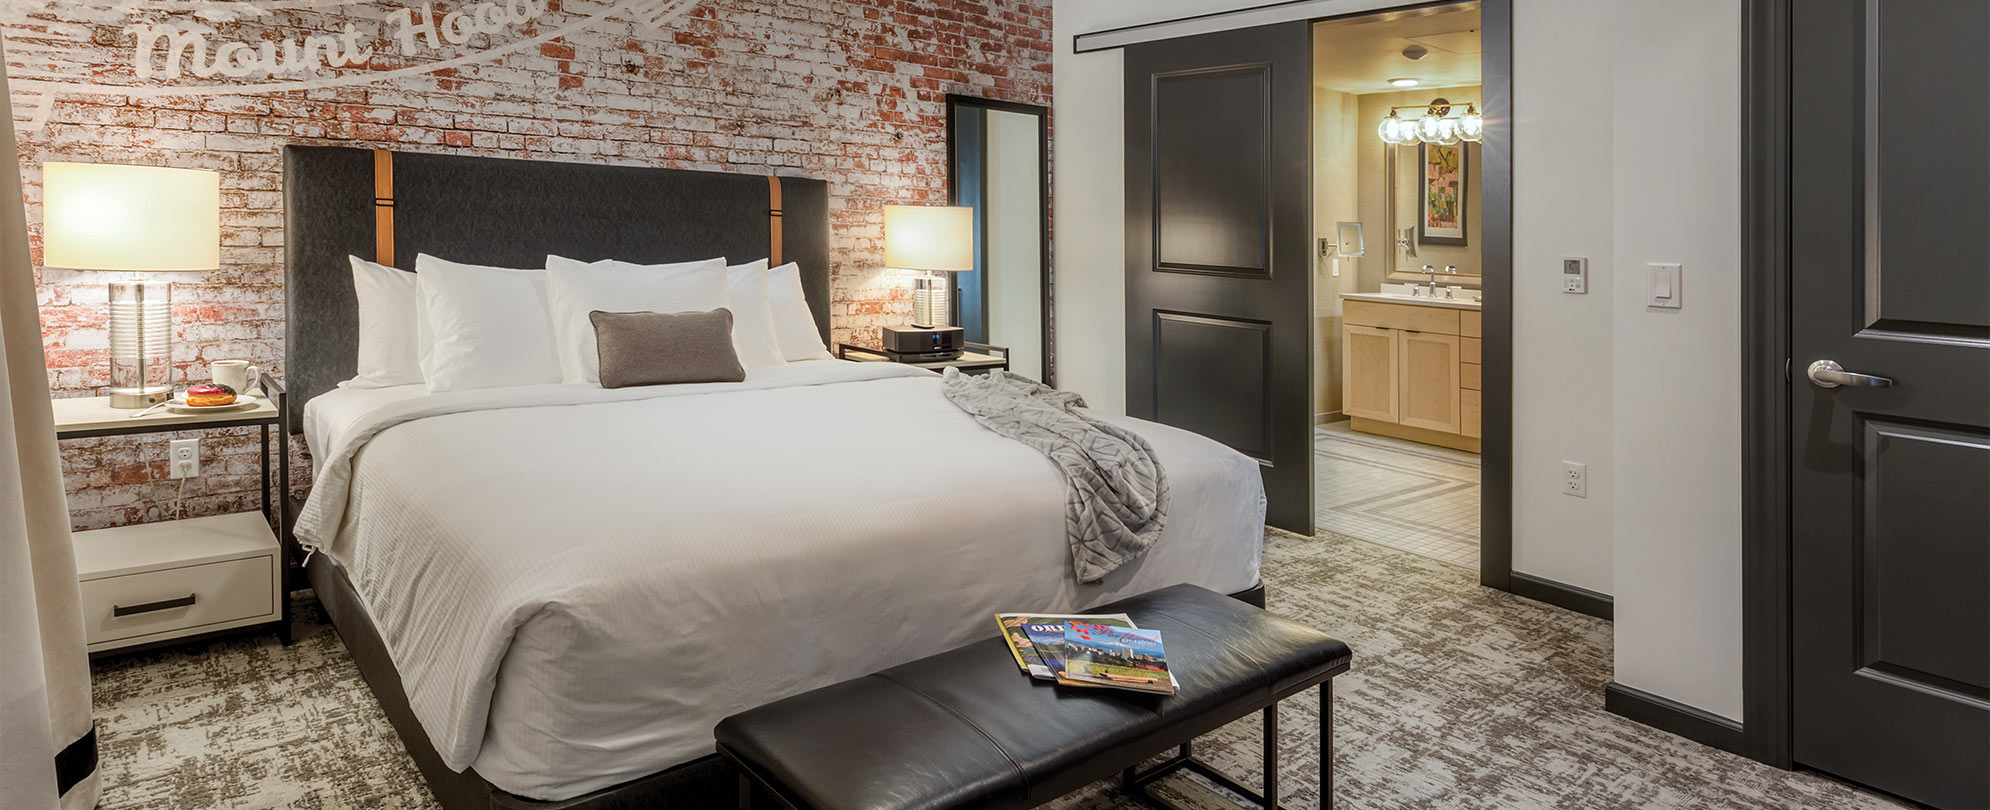 A suite bedroom with a bed and brick wall at WorldMark Portland Waterfront Park.